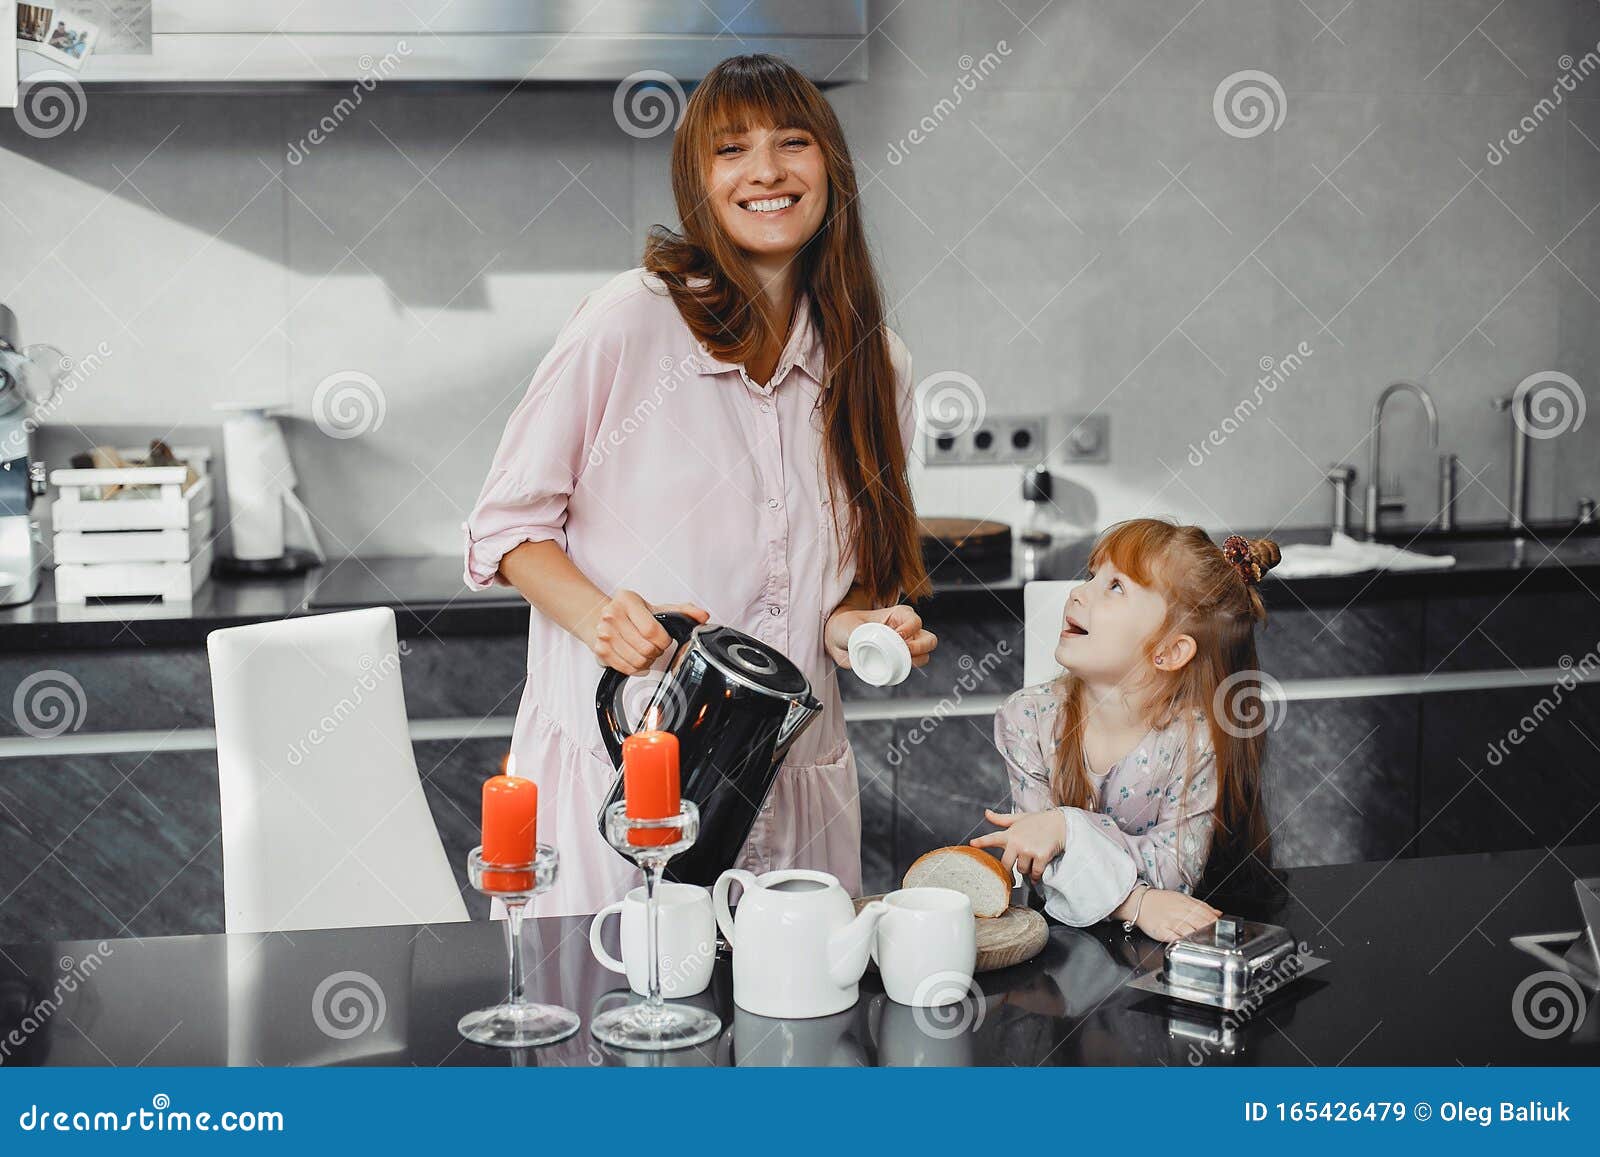 Mother With Daughter In A Kitchen Stock Image Image Of Cheerful Homey 165426479 